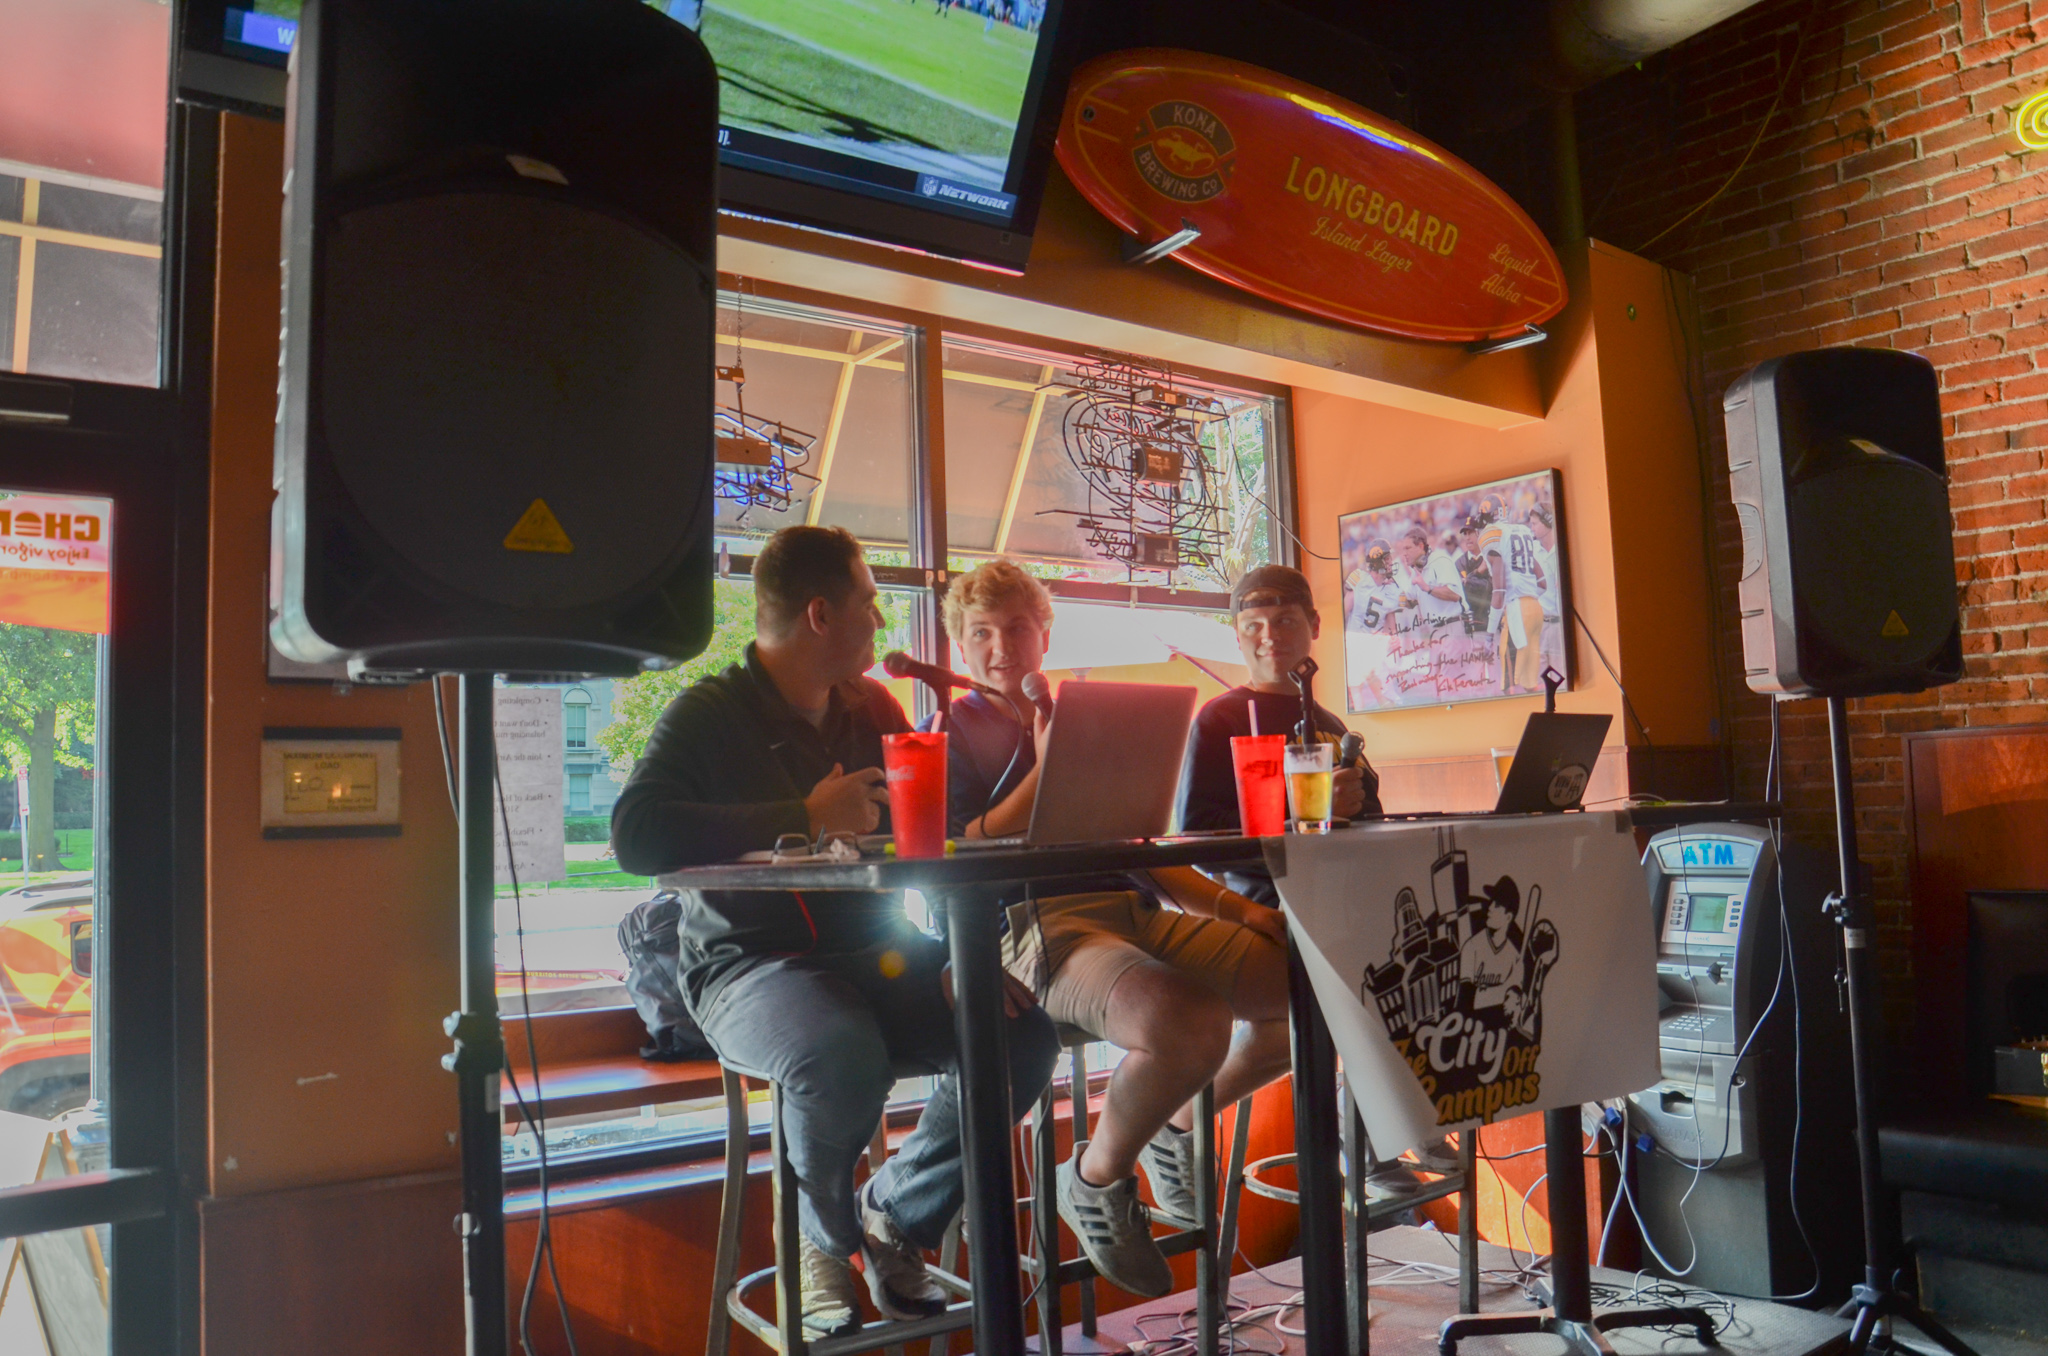 Sammy Sommerfeld (left) and Jack McFarland (right) talk with Sean Bock (middle) about the upcoming Iowa football game.